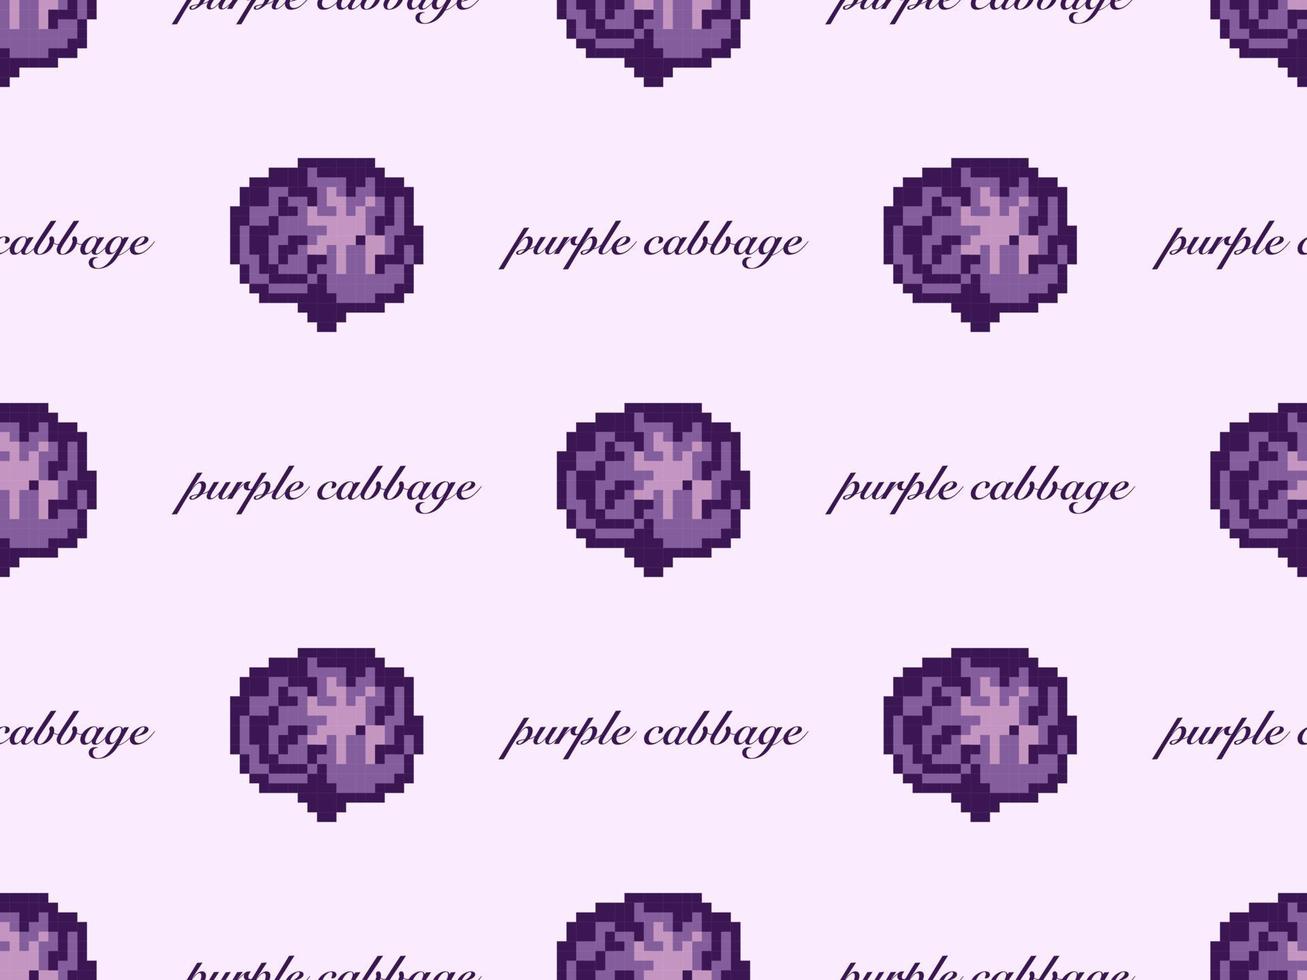 Purple cabbage cartoon character seamless pattern on purple background. Pixel style vector